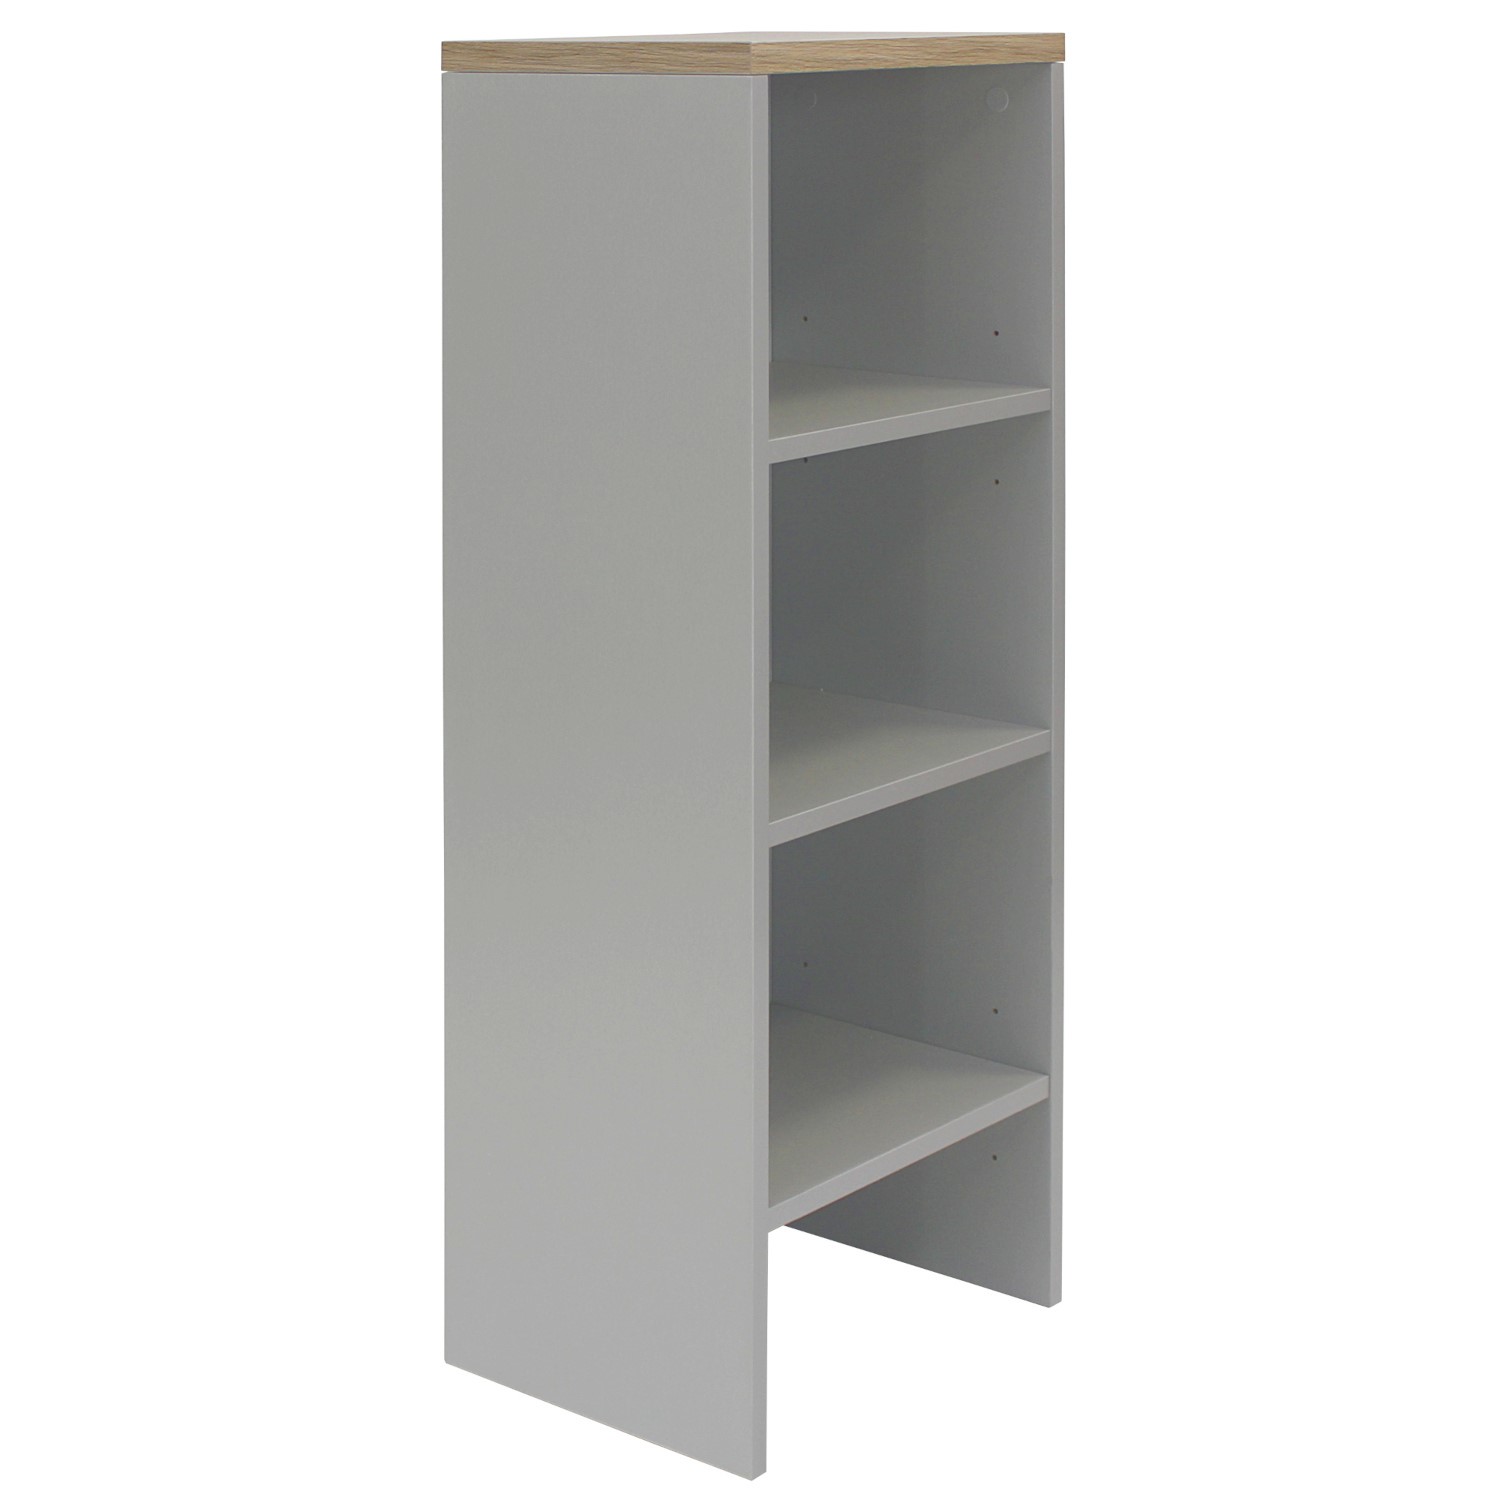 Read more about Narrow light grey wall mounted bookcase denver